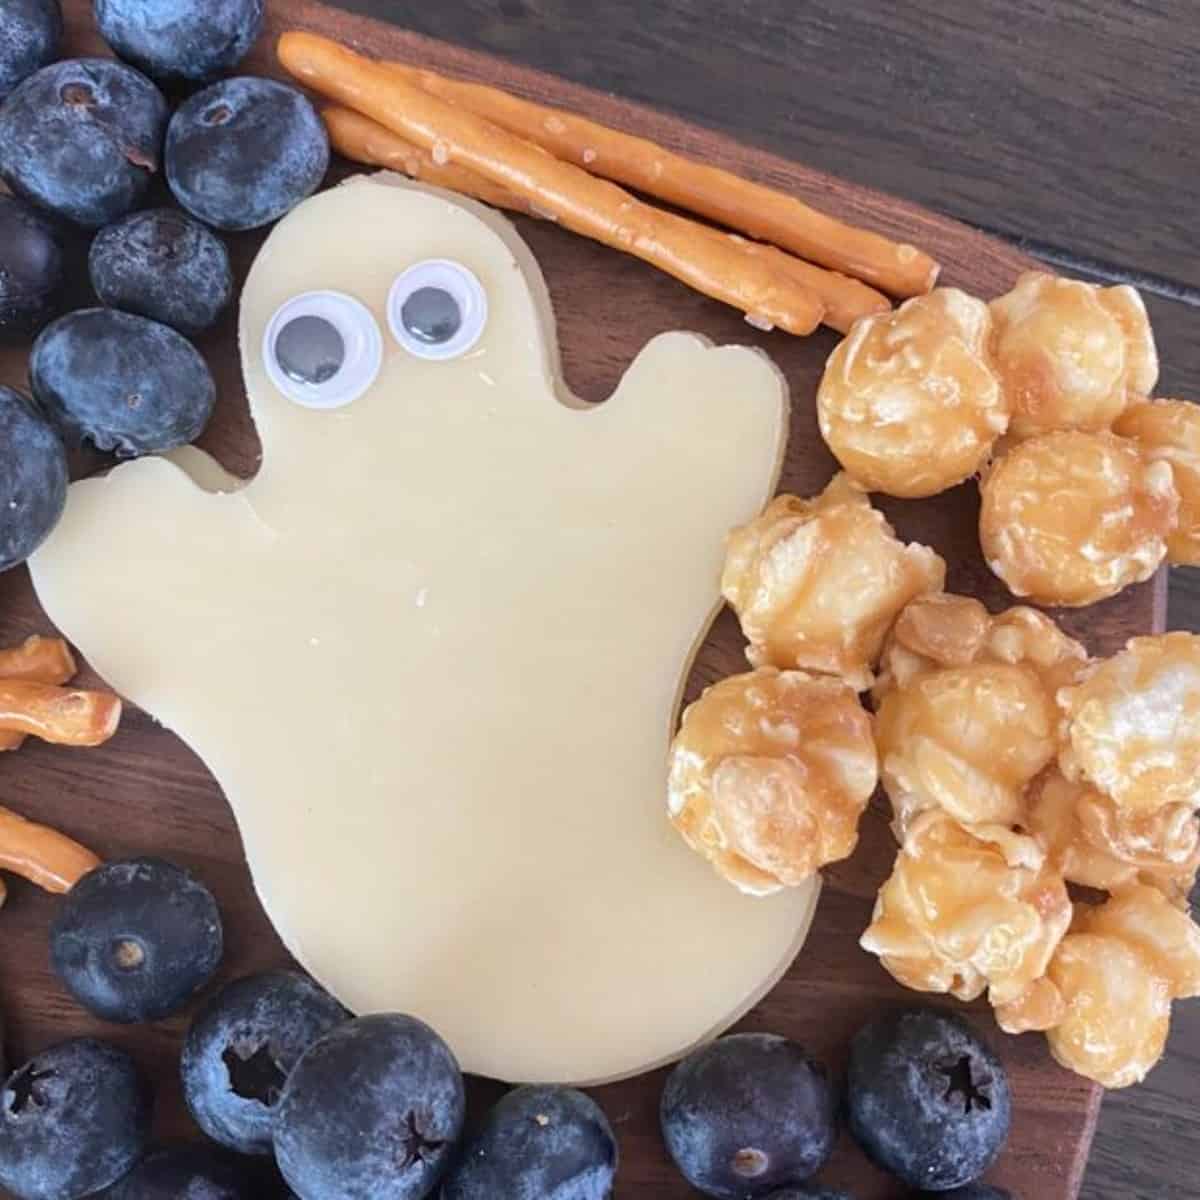 A slice of cheese cut to resemble a ghost. A pair of googly eyes are added to the cheese ghost. The cheese ghost is arranged on a Halloween snack board. 